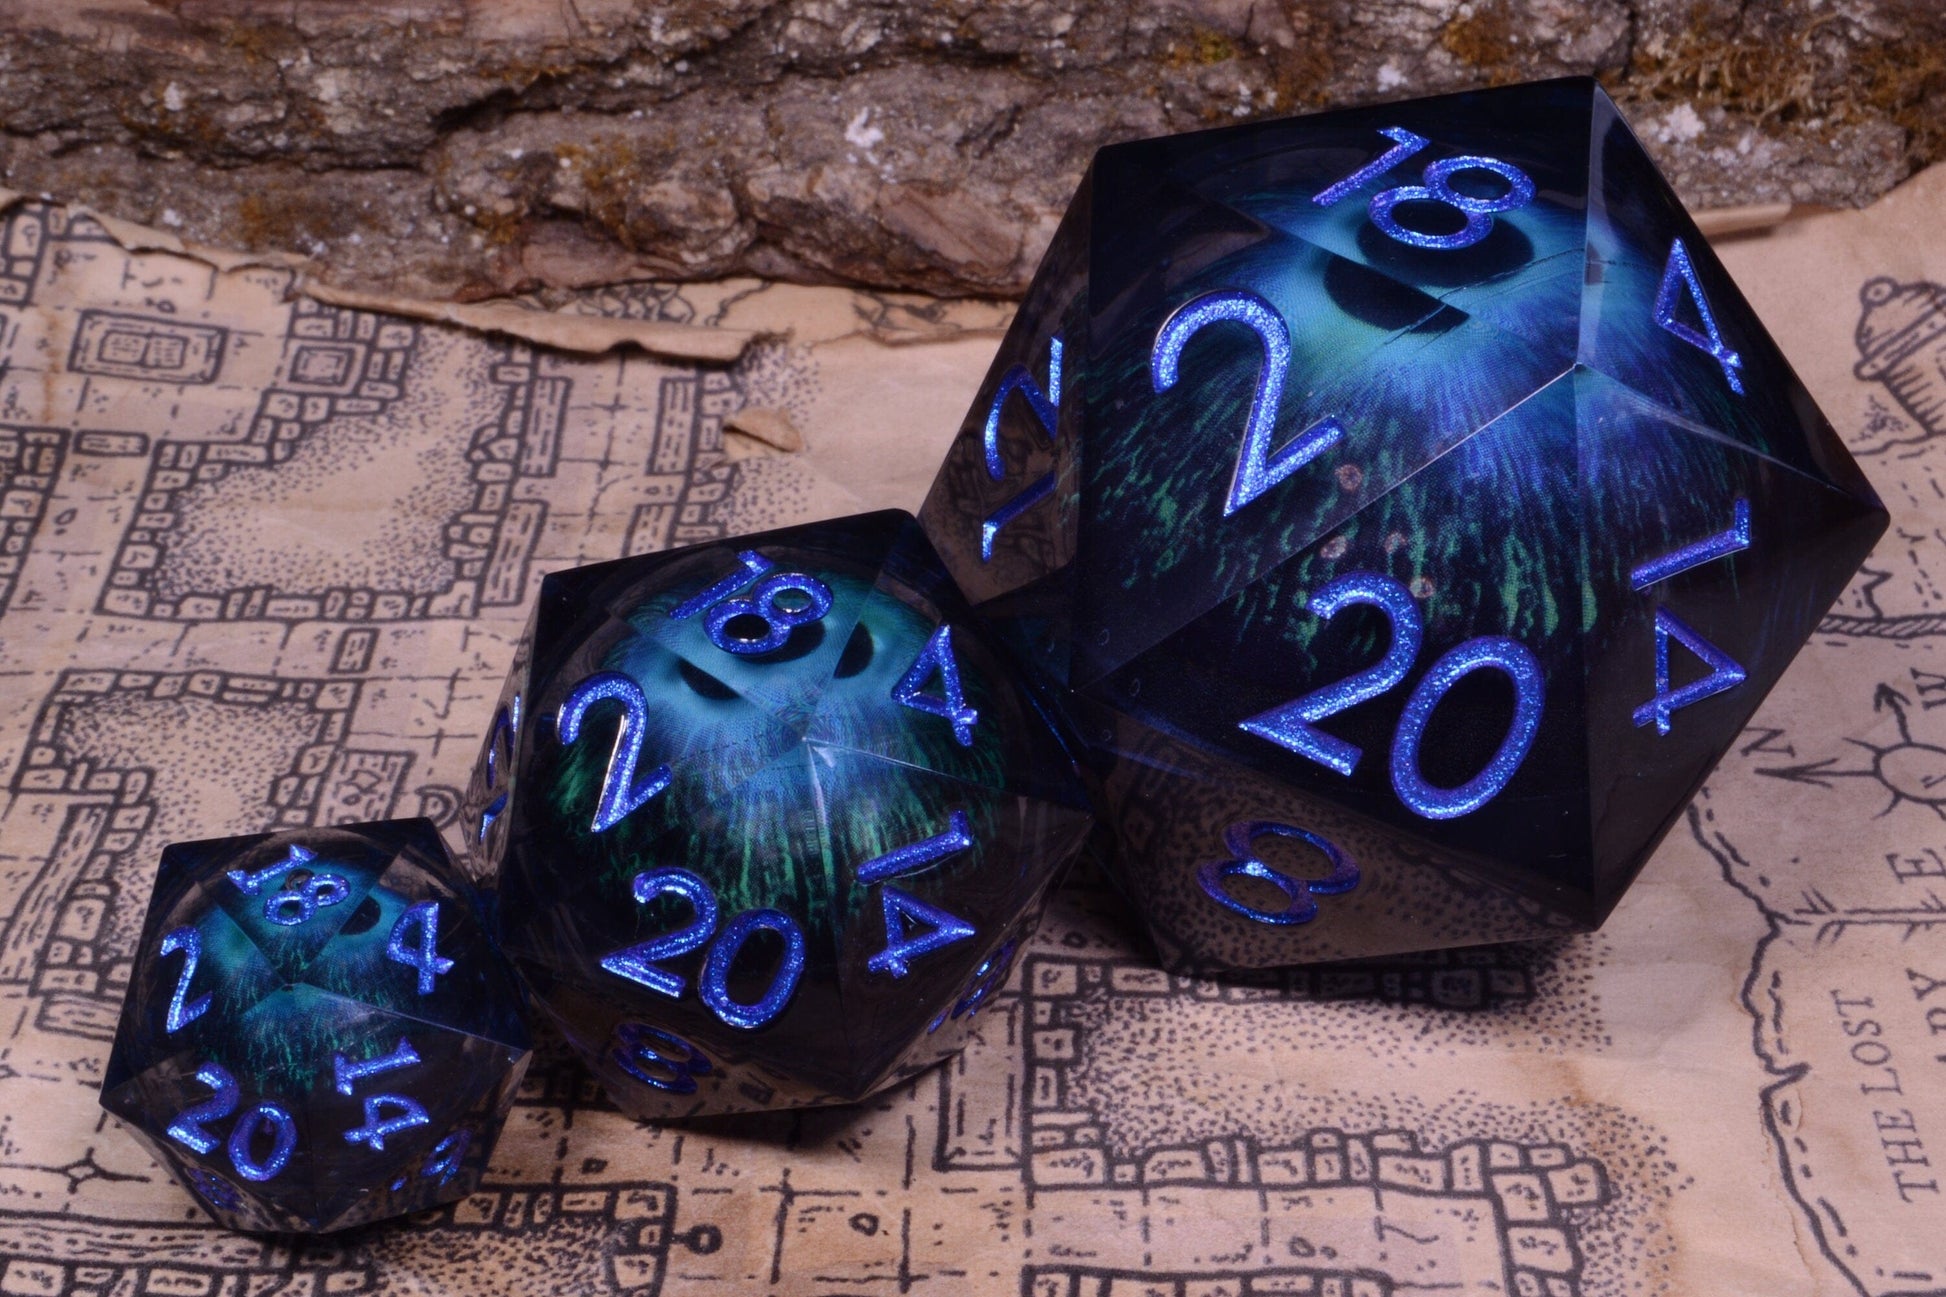 Front facing view of the evil eye moving eyeball liquid core dice, showing the three size options